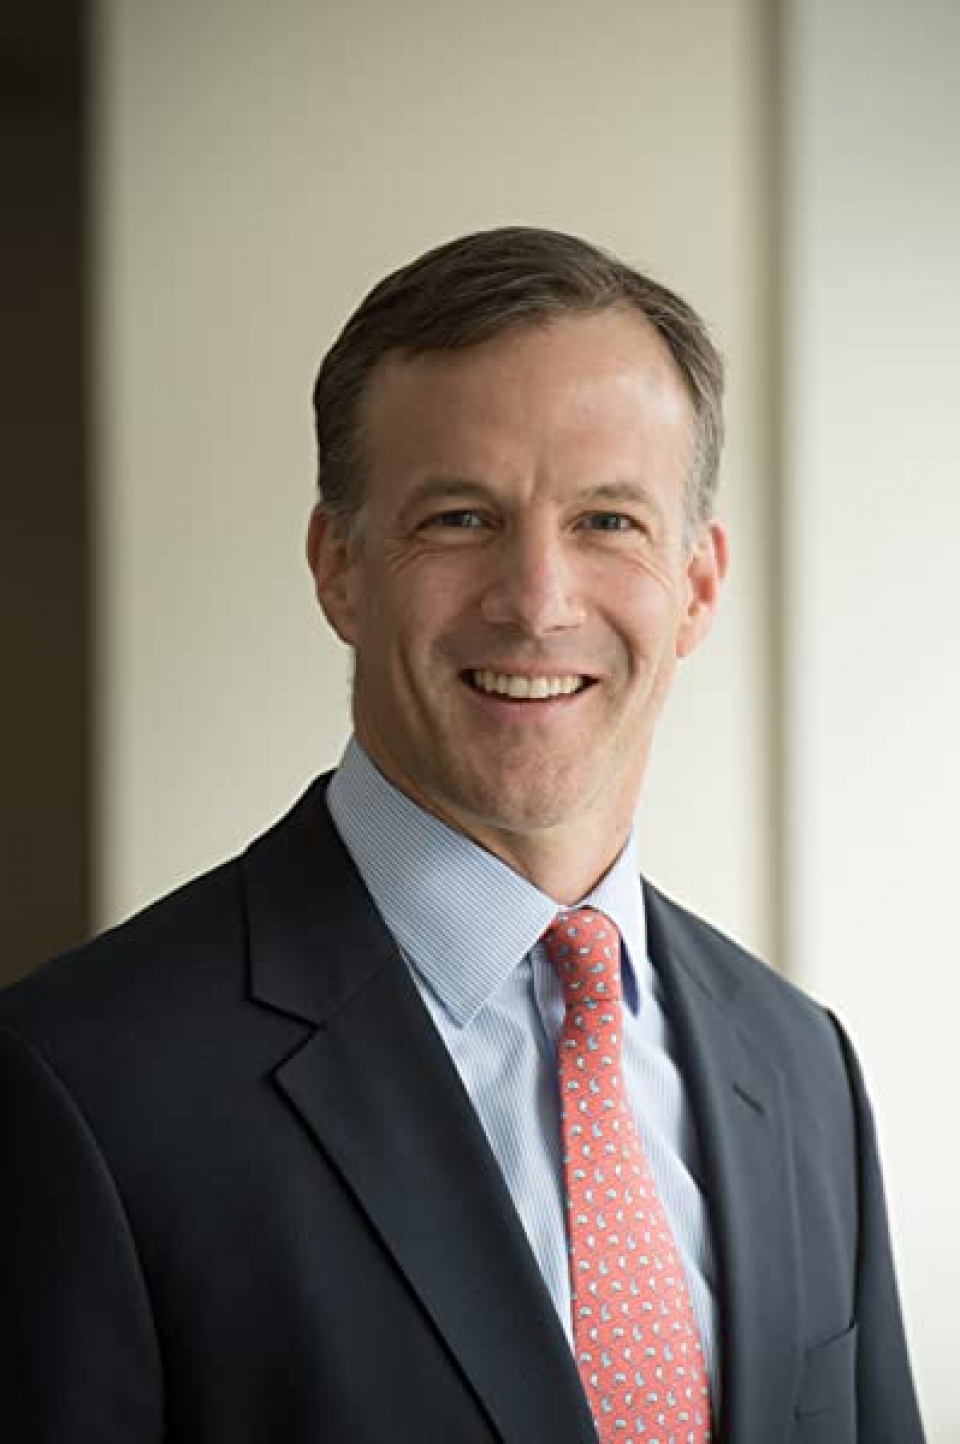 Stewart Patrick: Director of the International Institutions and Global Governance Program at the Council on Foreign Relations